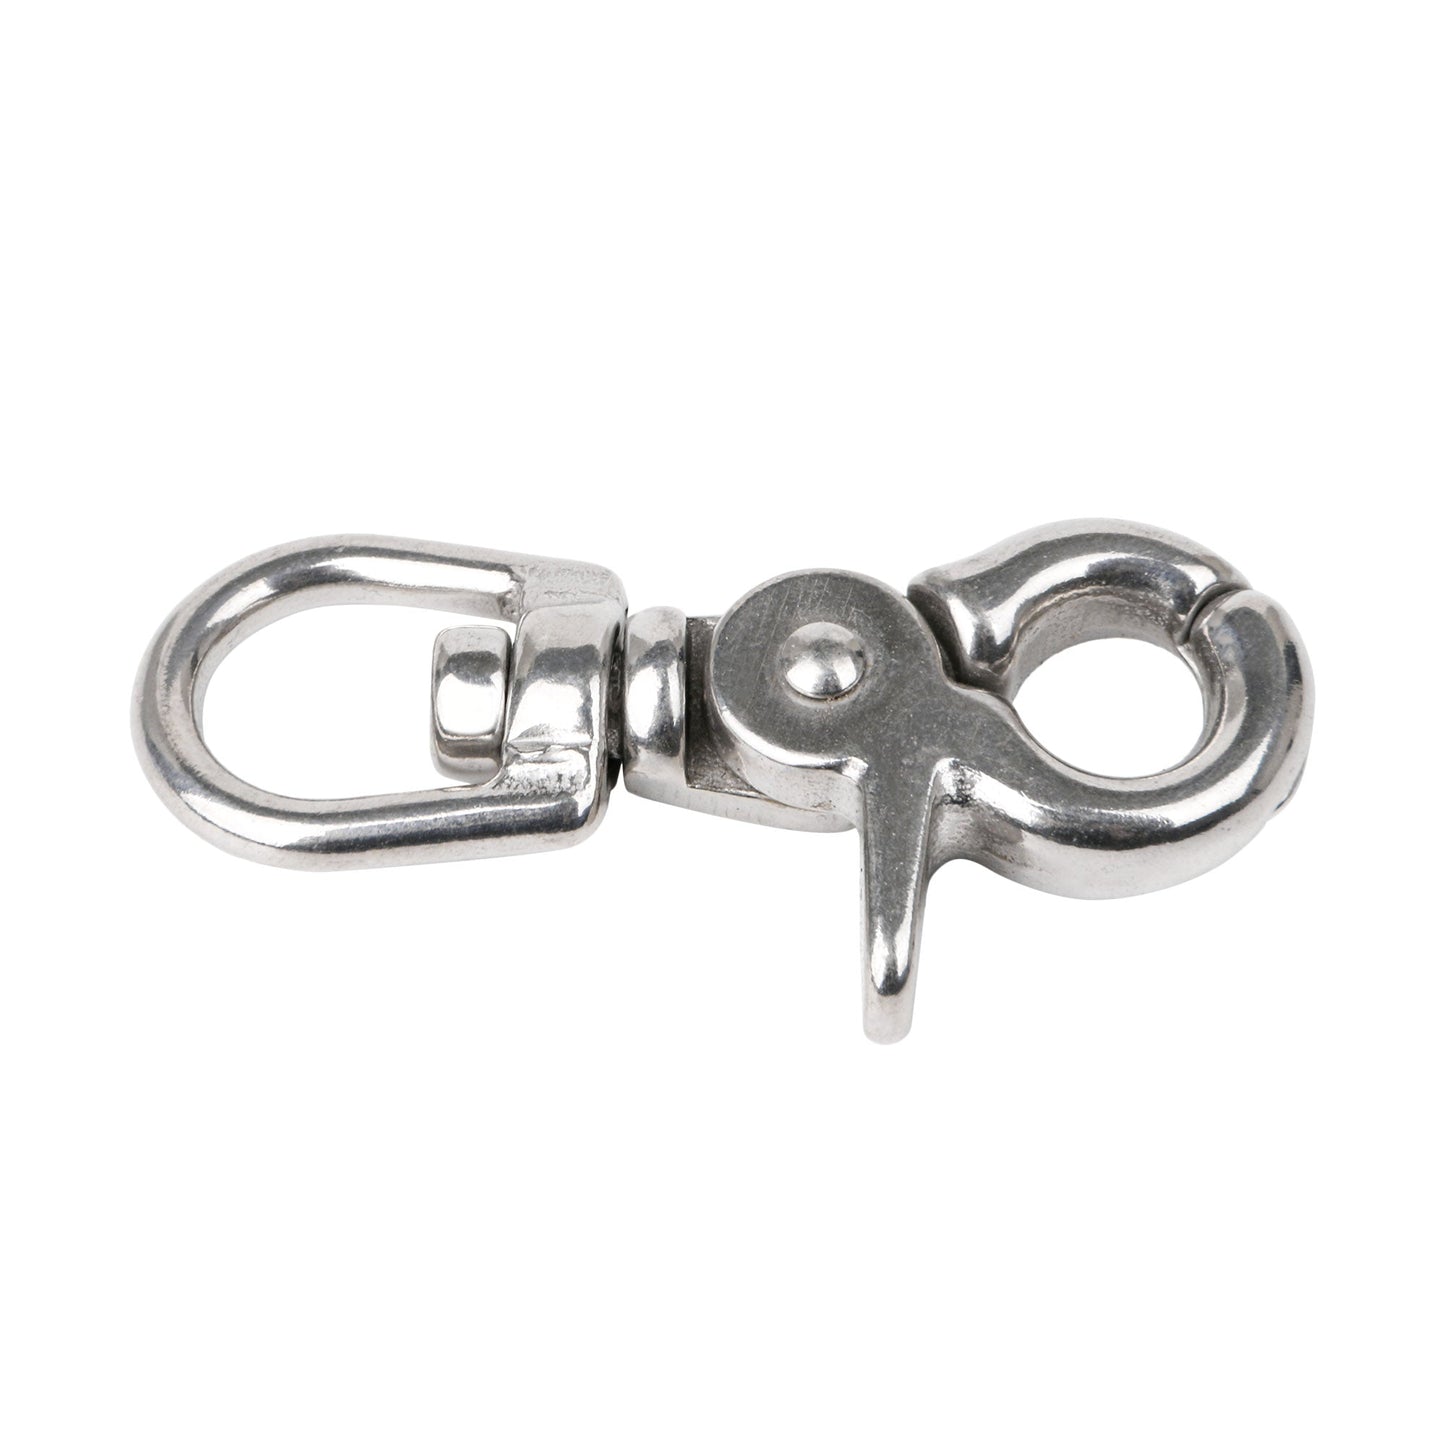 BQLZR Stainless Steel Swivel Lobster Clasp Snap Hooks 2.6inchx0.5inchx1.3inch Silver Pack of 5